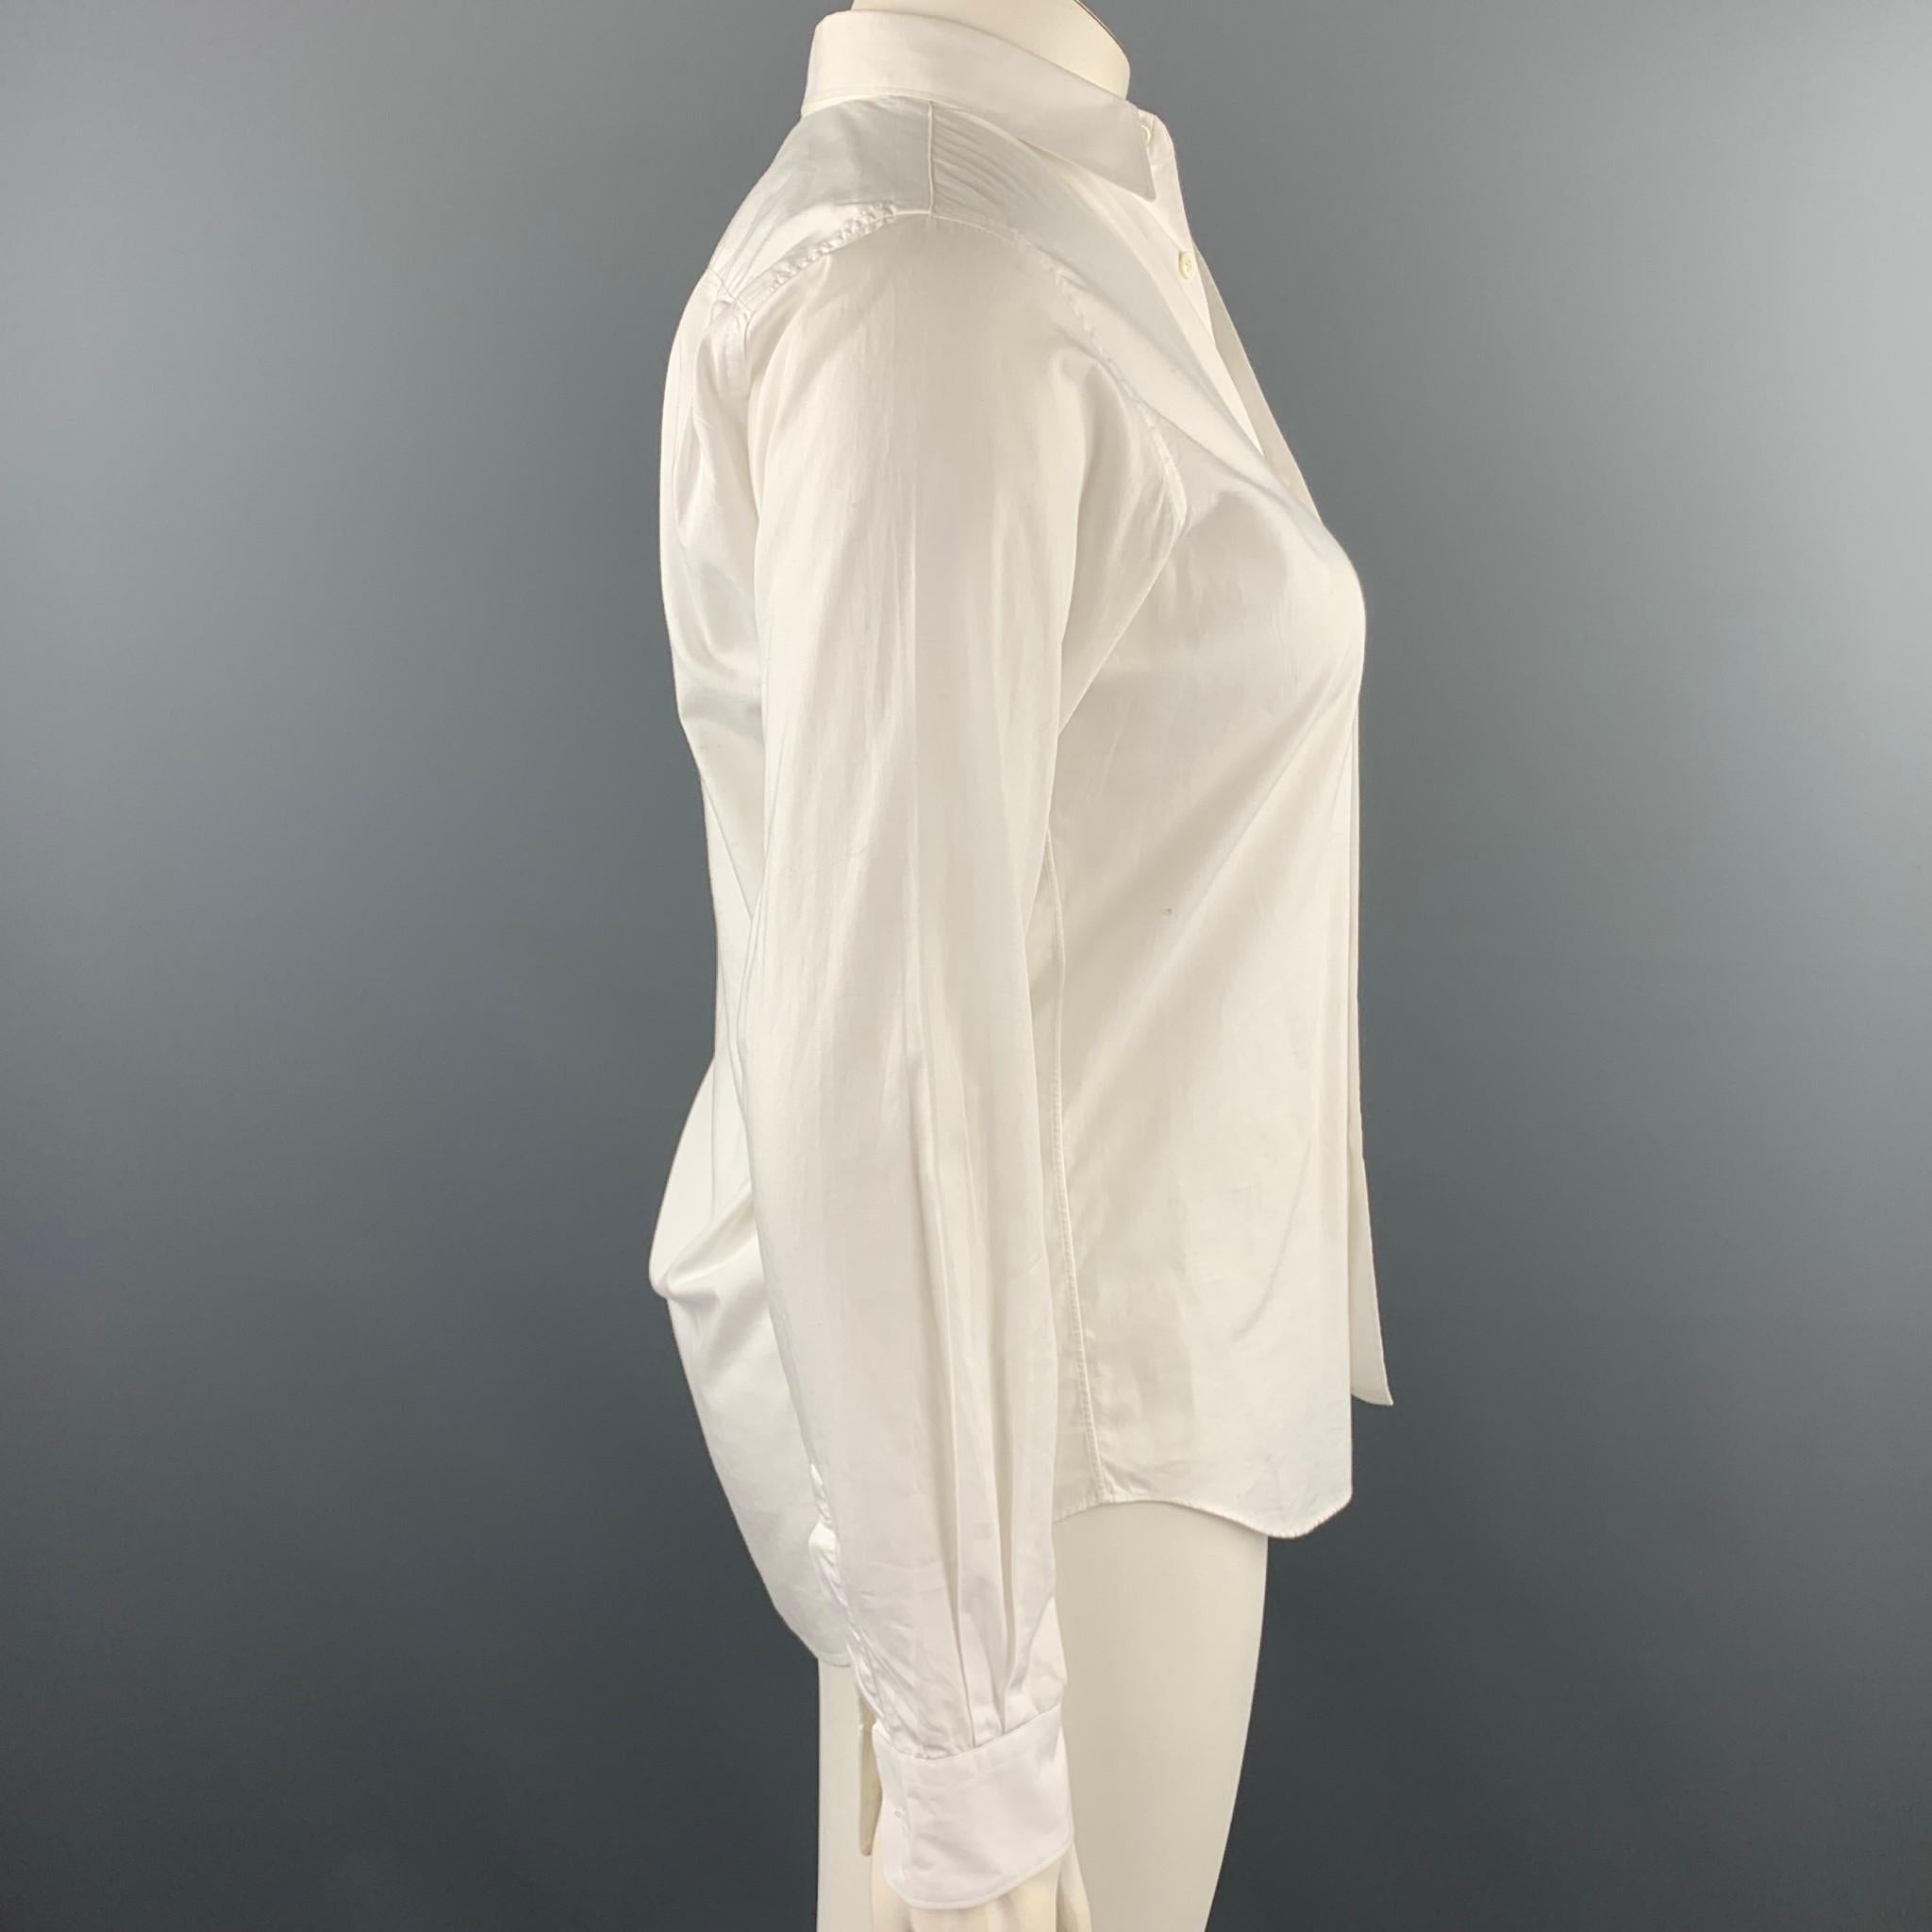 COMME des GARCONS SHIRT blouse comes in a white cotton with a contrast front pocket featuring a button up style and a spread collar. Made in France.

Very Good Pre-Owned Condition.
Marked: X

Measurements:

Shoulder: 15.5 in. 
Bust: 38 in. 
Sleeve: